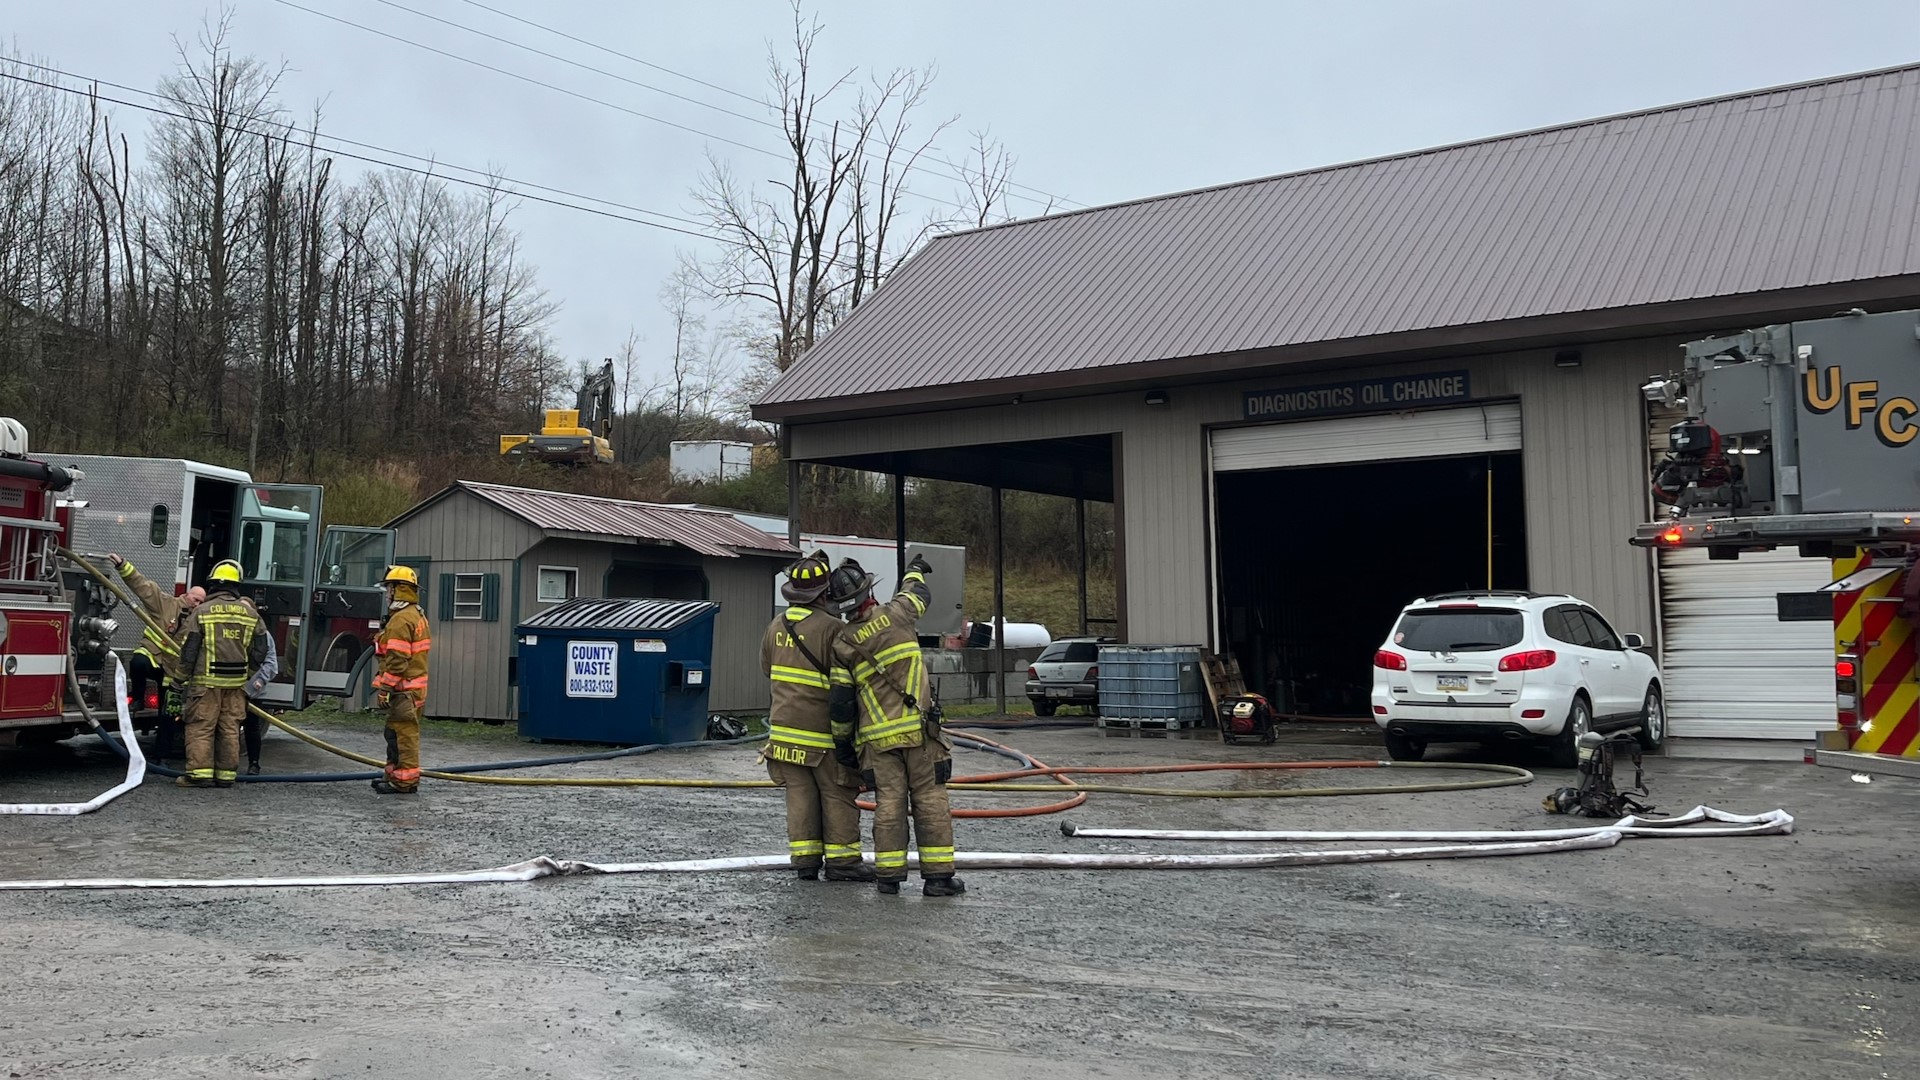 Firefighters were called out before 8 a.m. for a fire at a business on Route 706 in New Milford Township.